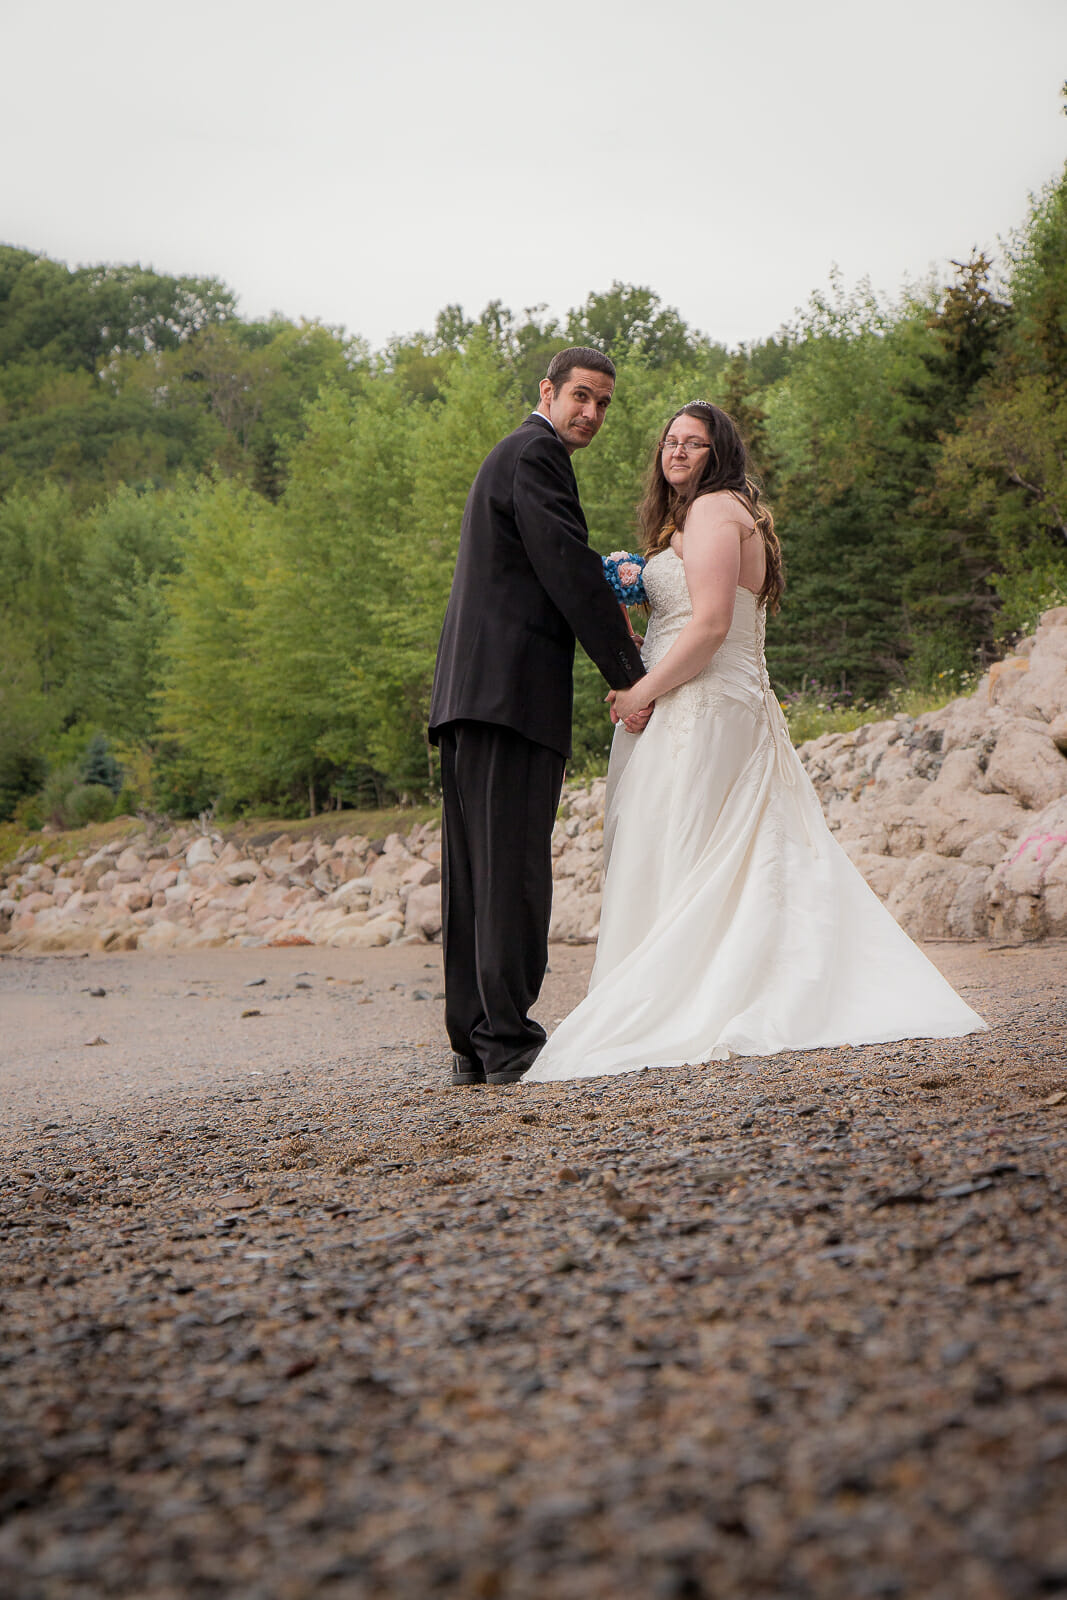 A photo from the Frail Wedding, shot in Deep Brook, Nova Scotia on a beautiful sunny day